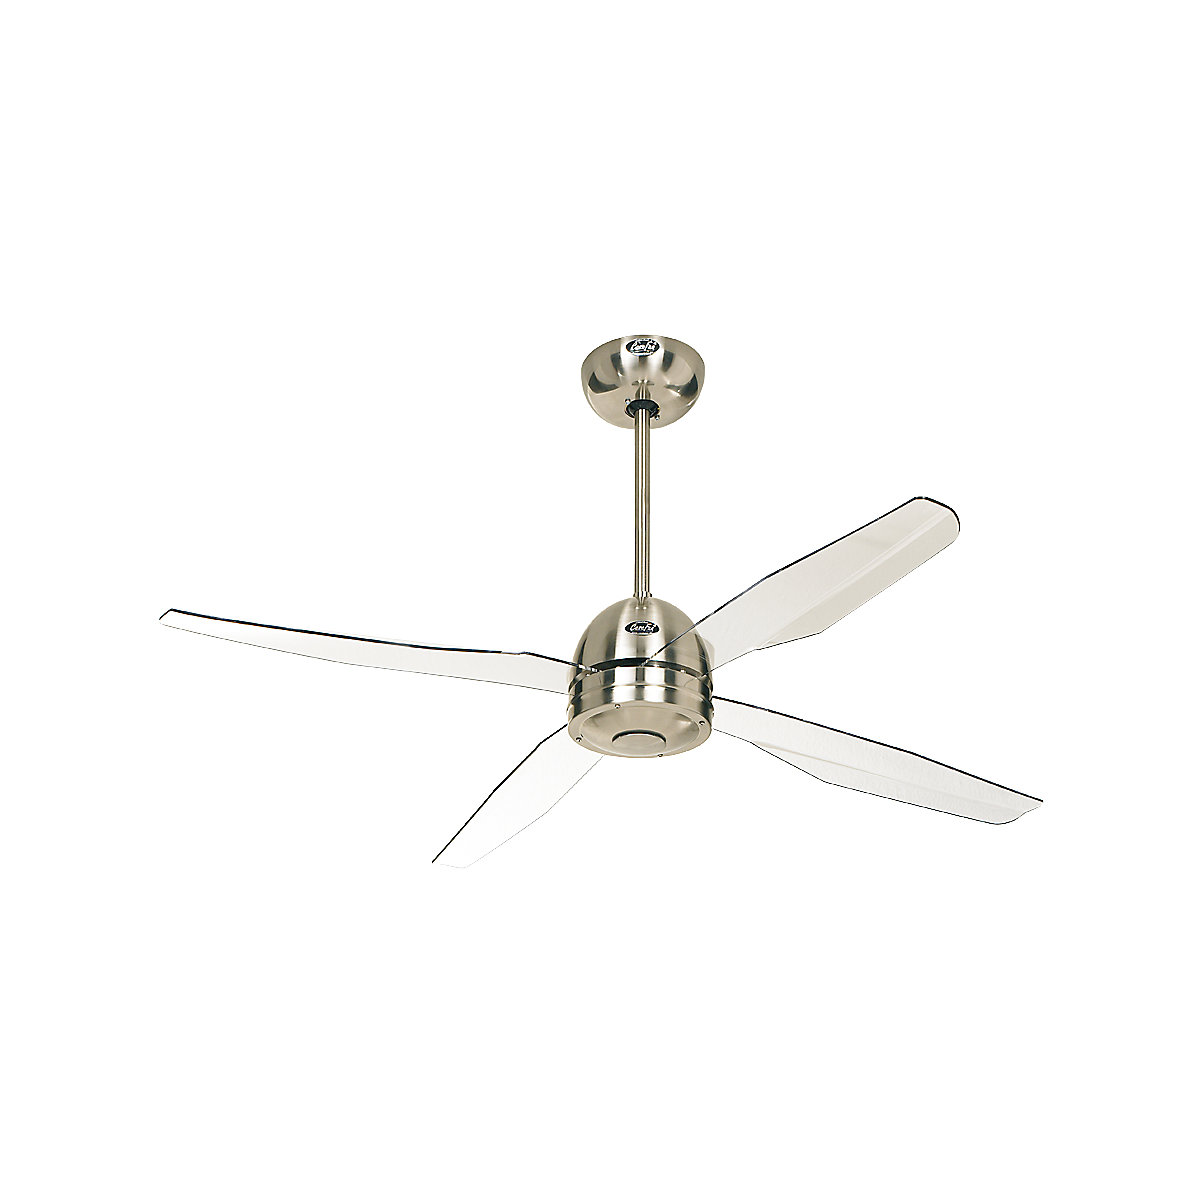 Libelle Ceiling Fan Without Remote Control Kaiser Kraft International - How To Control Ceiling Fan Without Remote